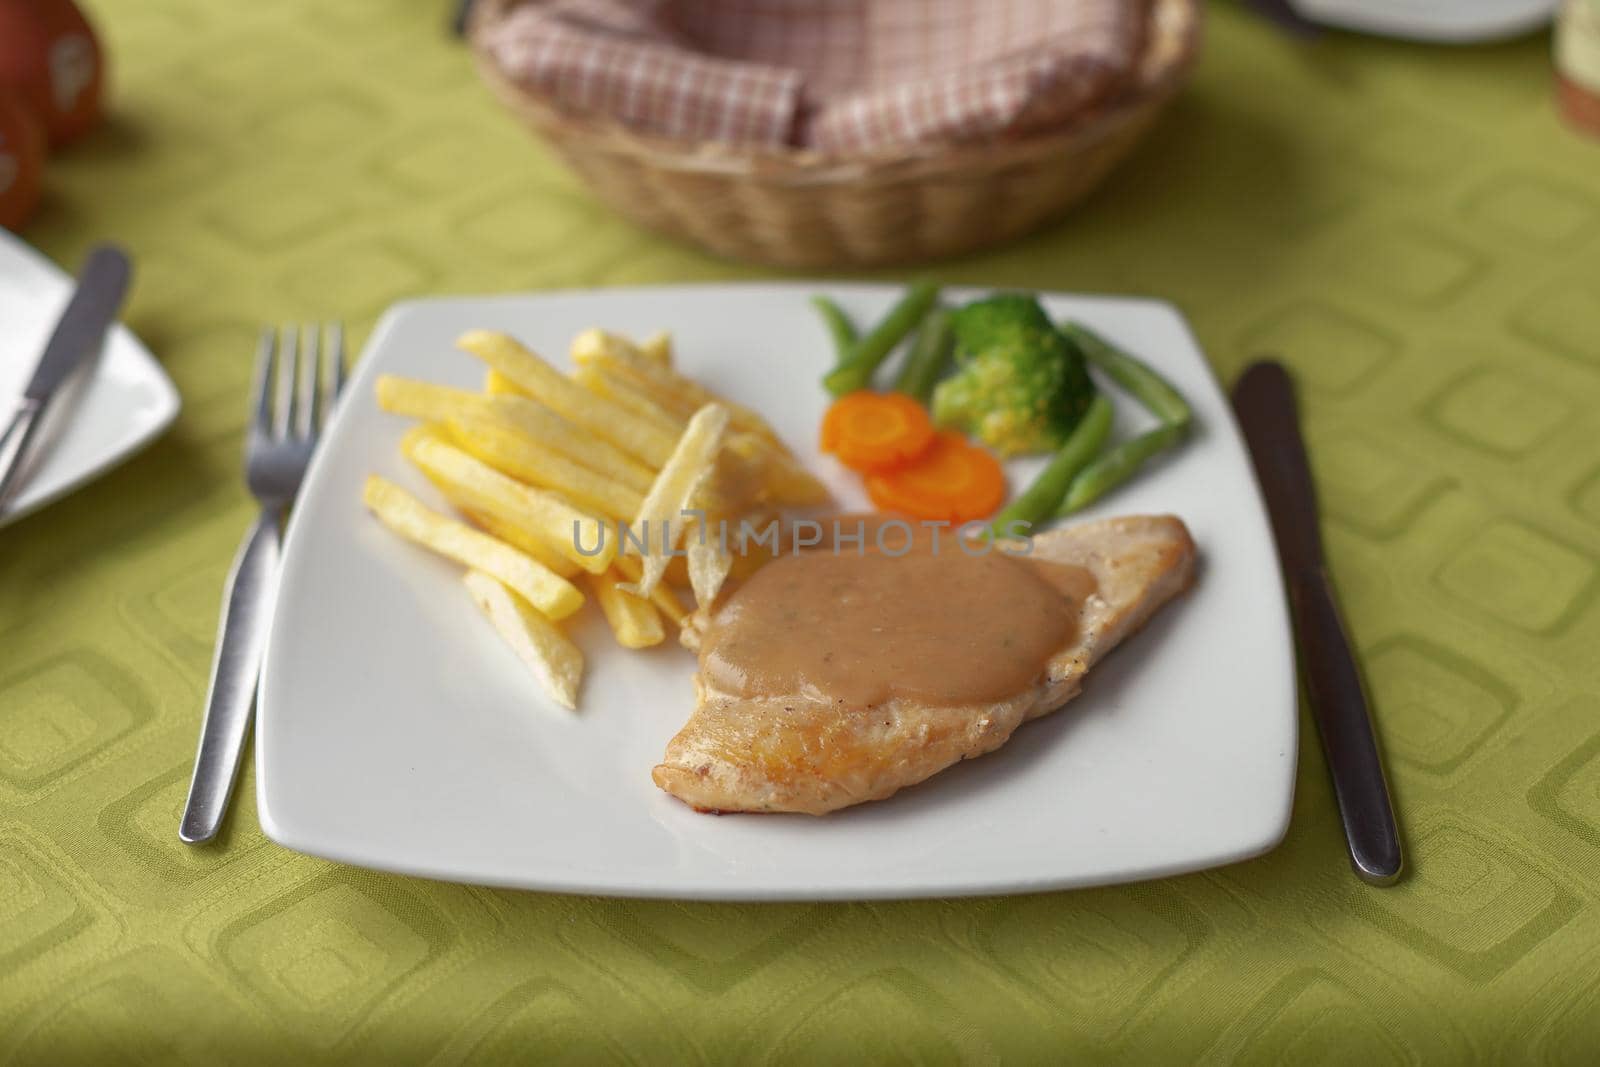 Grilled chicken with colca sauce, french fries and vegetable salad on traditional table setting.